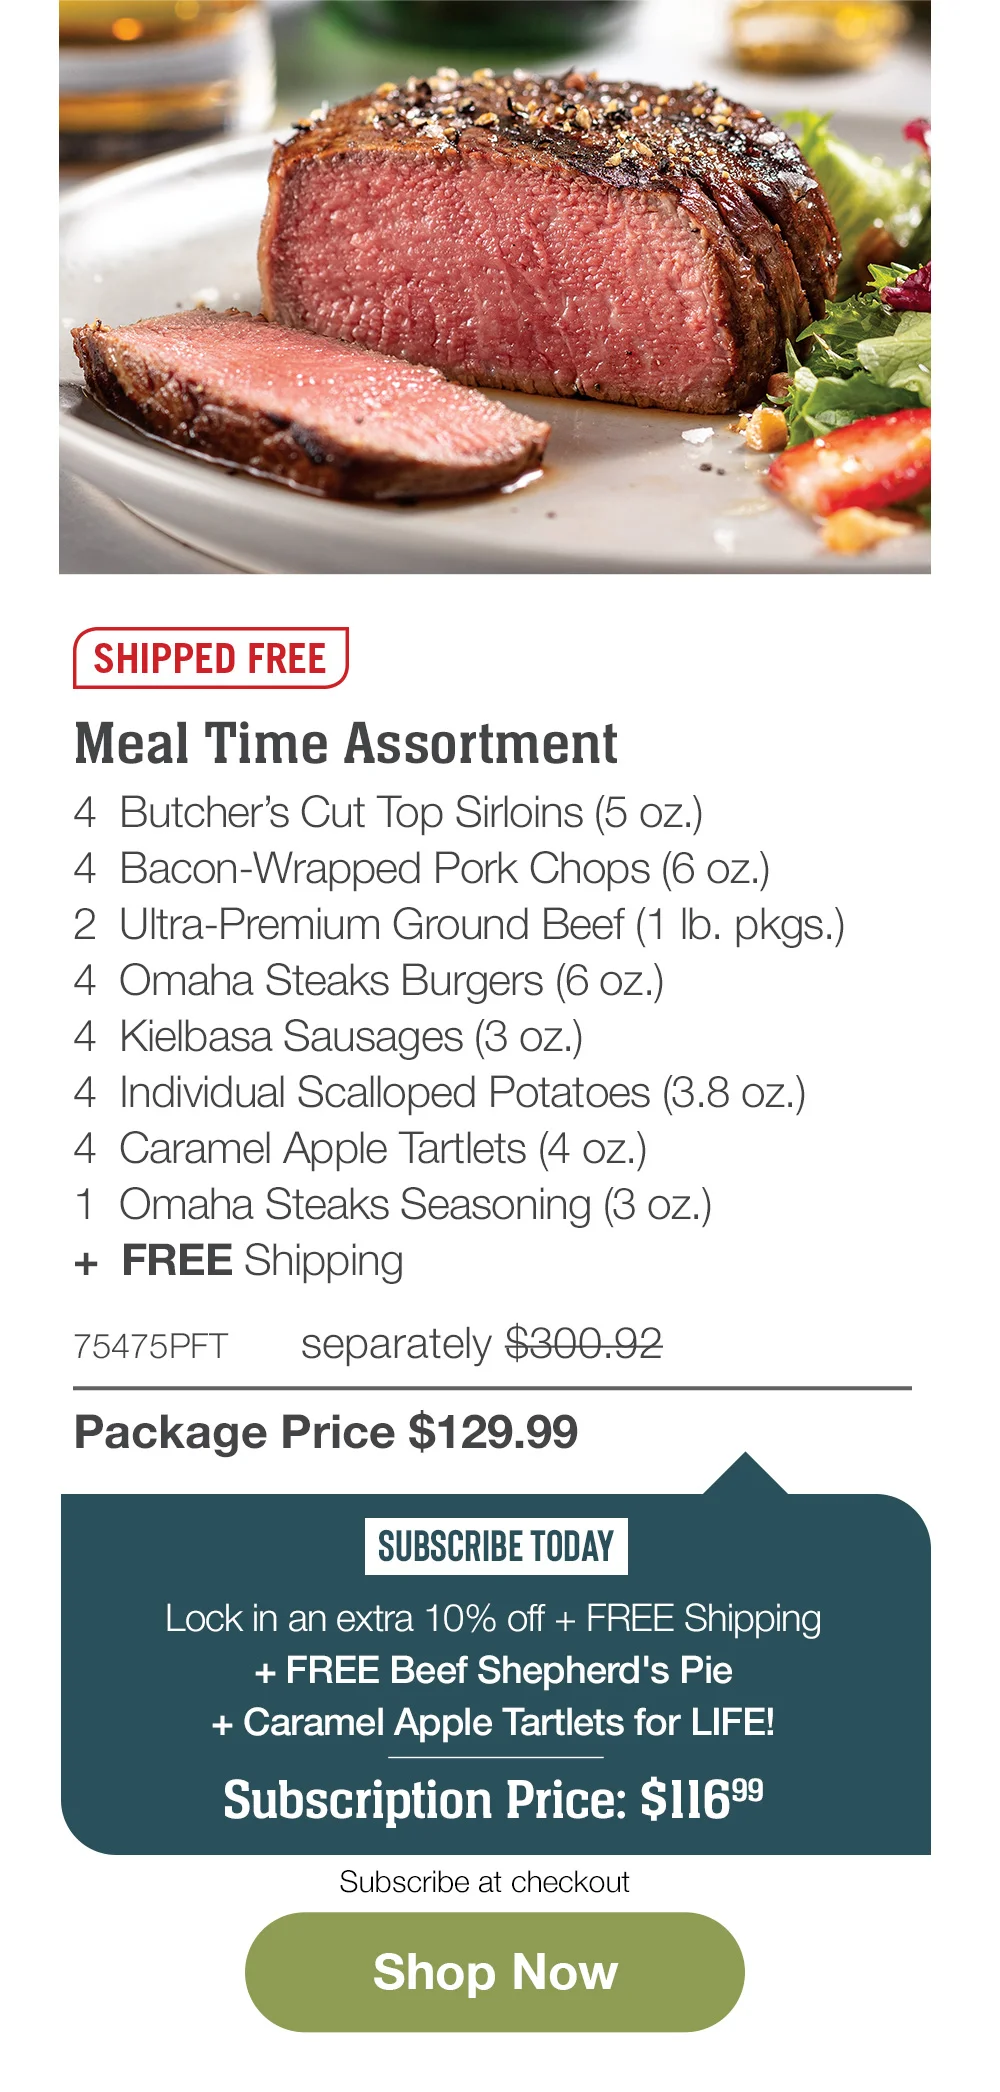 SHIPPED FREE | Meal Time Assortment - 4 Butcher's Cut Top Sirloins (5 oz.) - 4 Bacon-Wrapped Pork Chops (6 oz.) - 2 Ultra-Premium Ground Beef (1 lb. pkgs.) - 4 Omaha Steaks Burgers (6 oz.) - 4 Kielbasa Sausages (3 oz.) - 4 Individual Scalloped Potatoes (3.8 oz.) - 4 Caramel Apple Tartlets (4 oz.) - 1 Omaha Steaks Seasoning (3 oz.) + FREE Shipping - 75475PFT separately \\$300.92 | Package Price \\$129.99 | SUBSCRIBE TODAY - Lock in an extra 10% off + FREE Shipping + FREE Beef Shepherd's Pie + Caramel Apple Tartlets for LIFE! Subscription Price: \\$116.99 | Subscribe at checkout || Shop Now